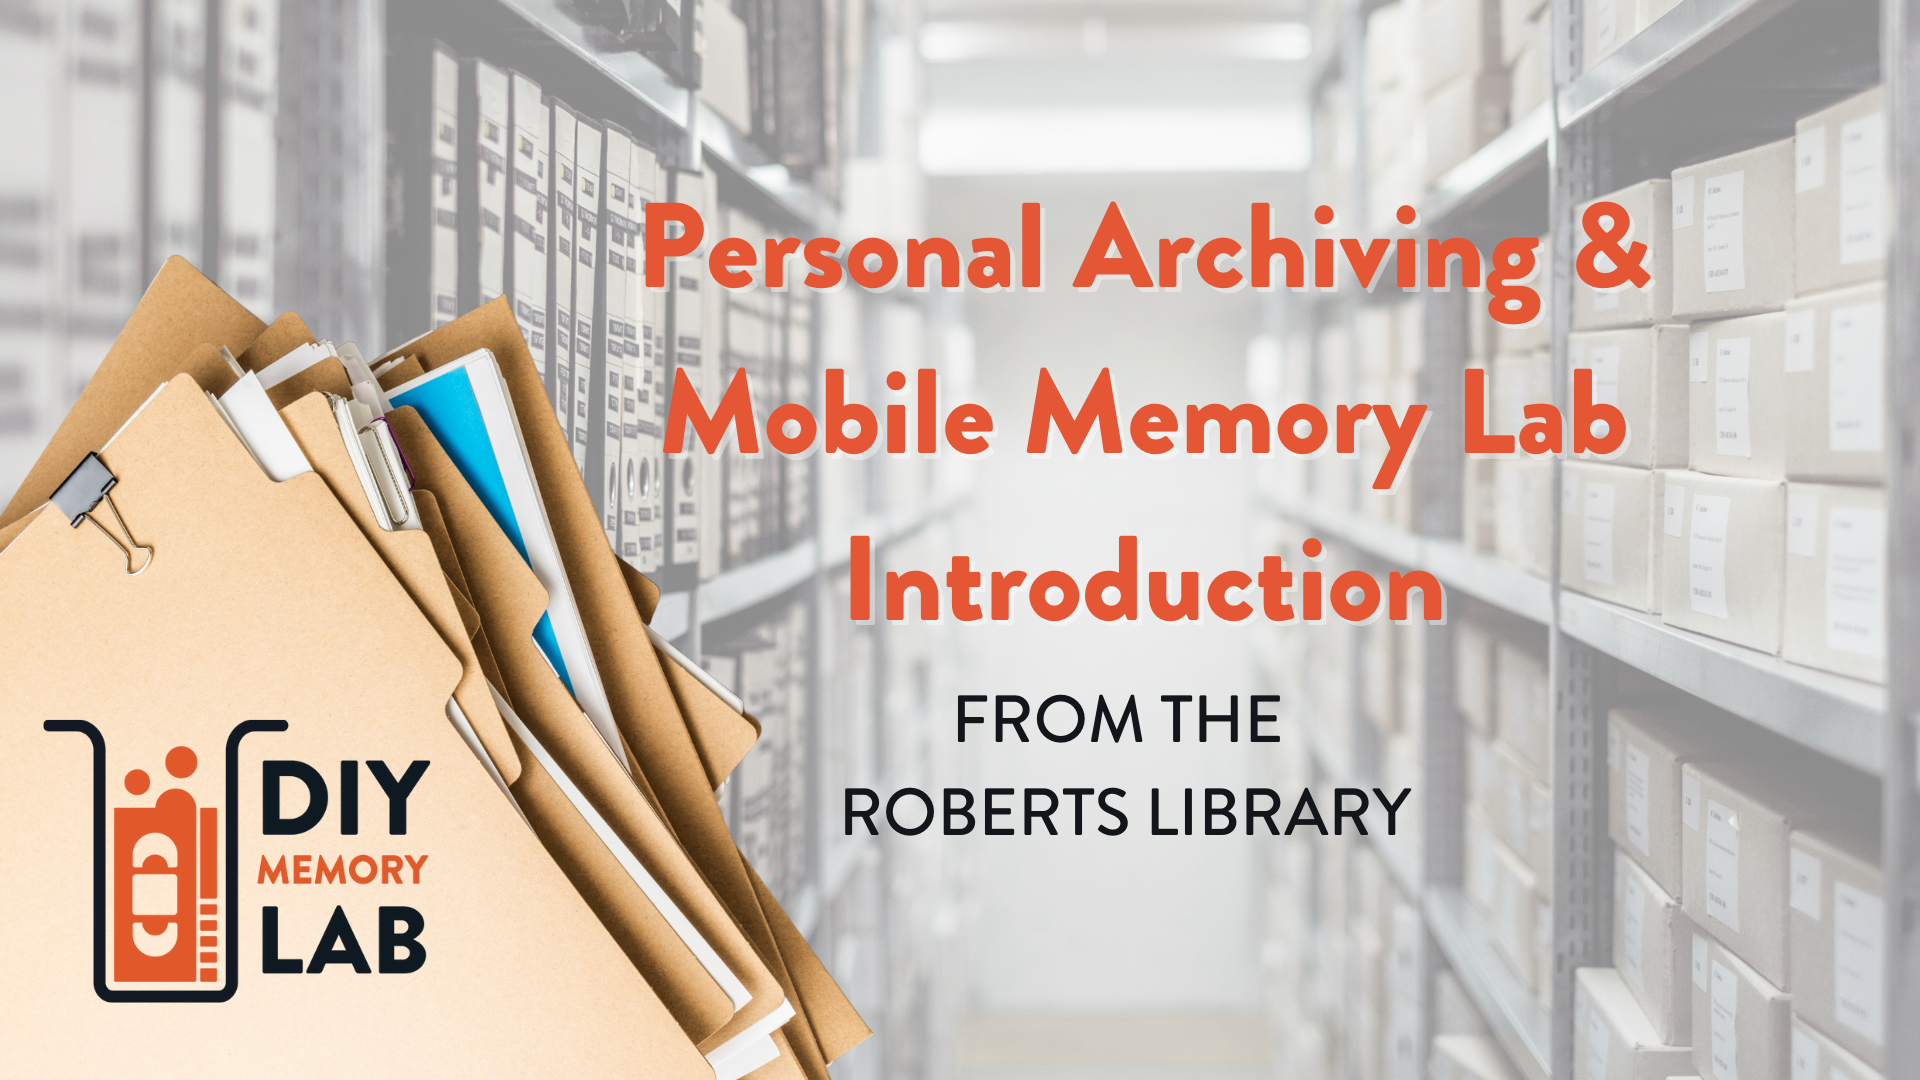 Personal Archiving & Mobile Memory Lab